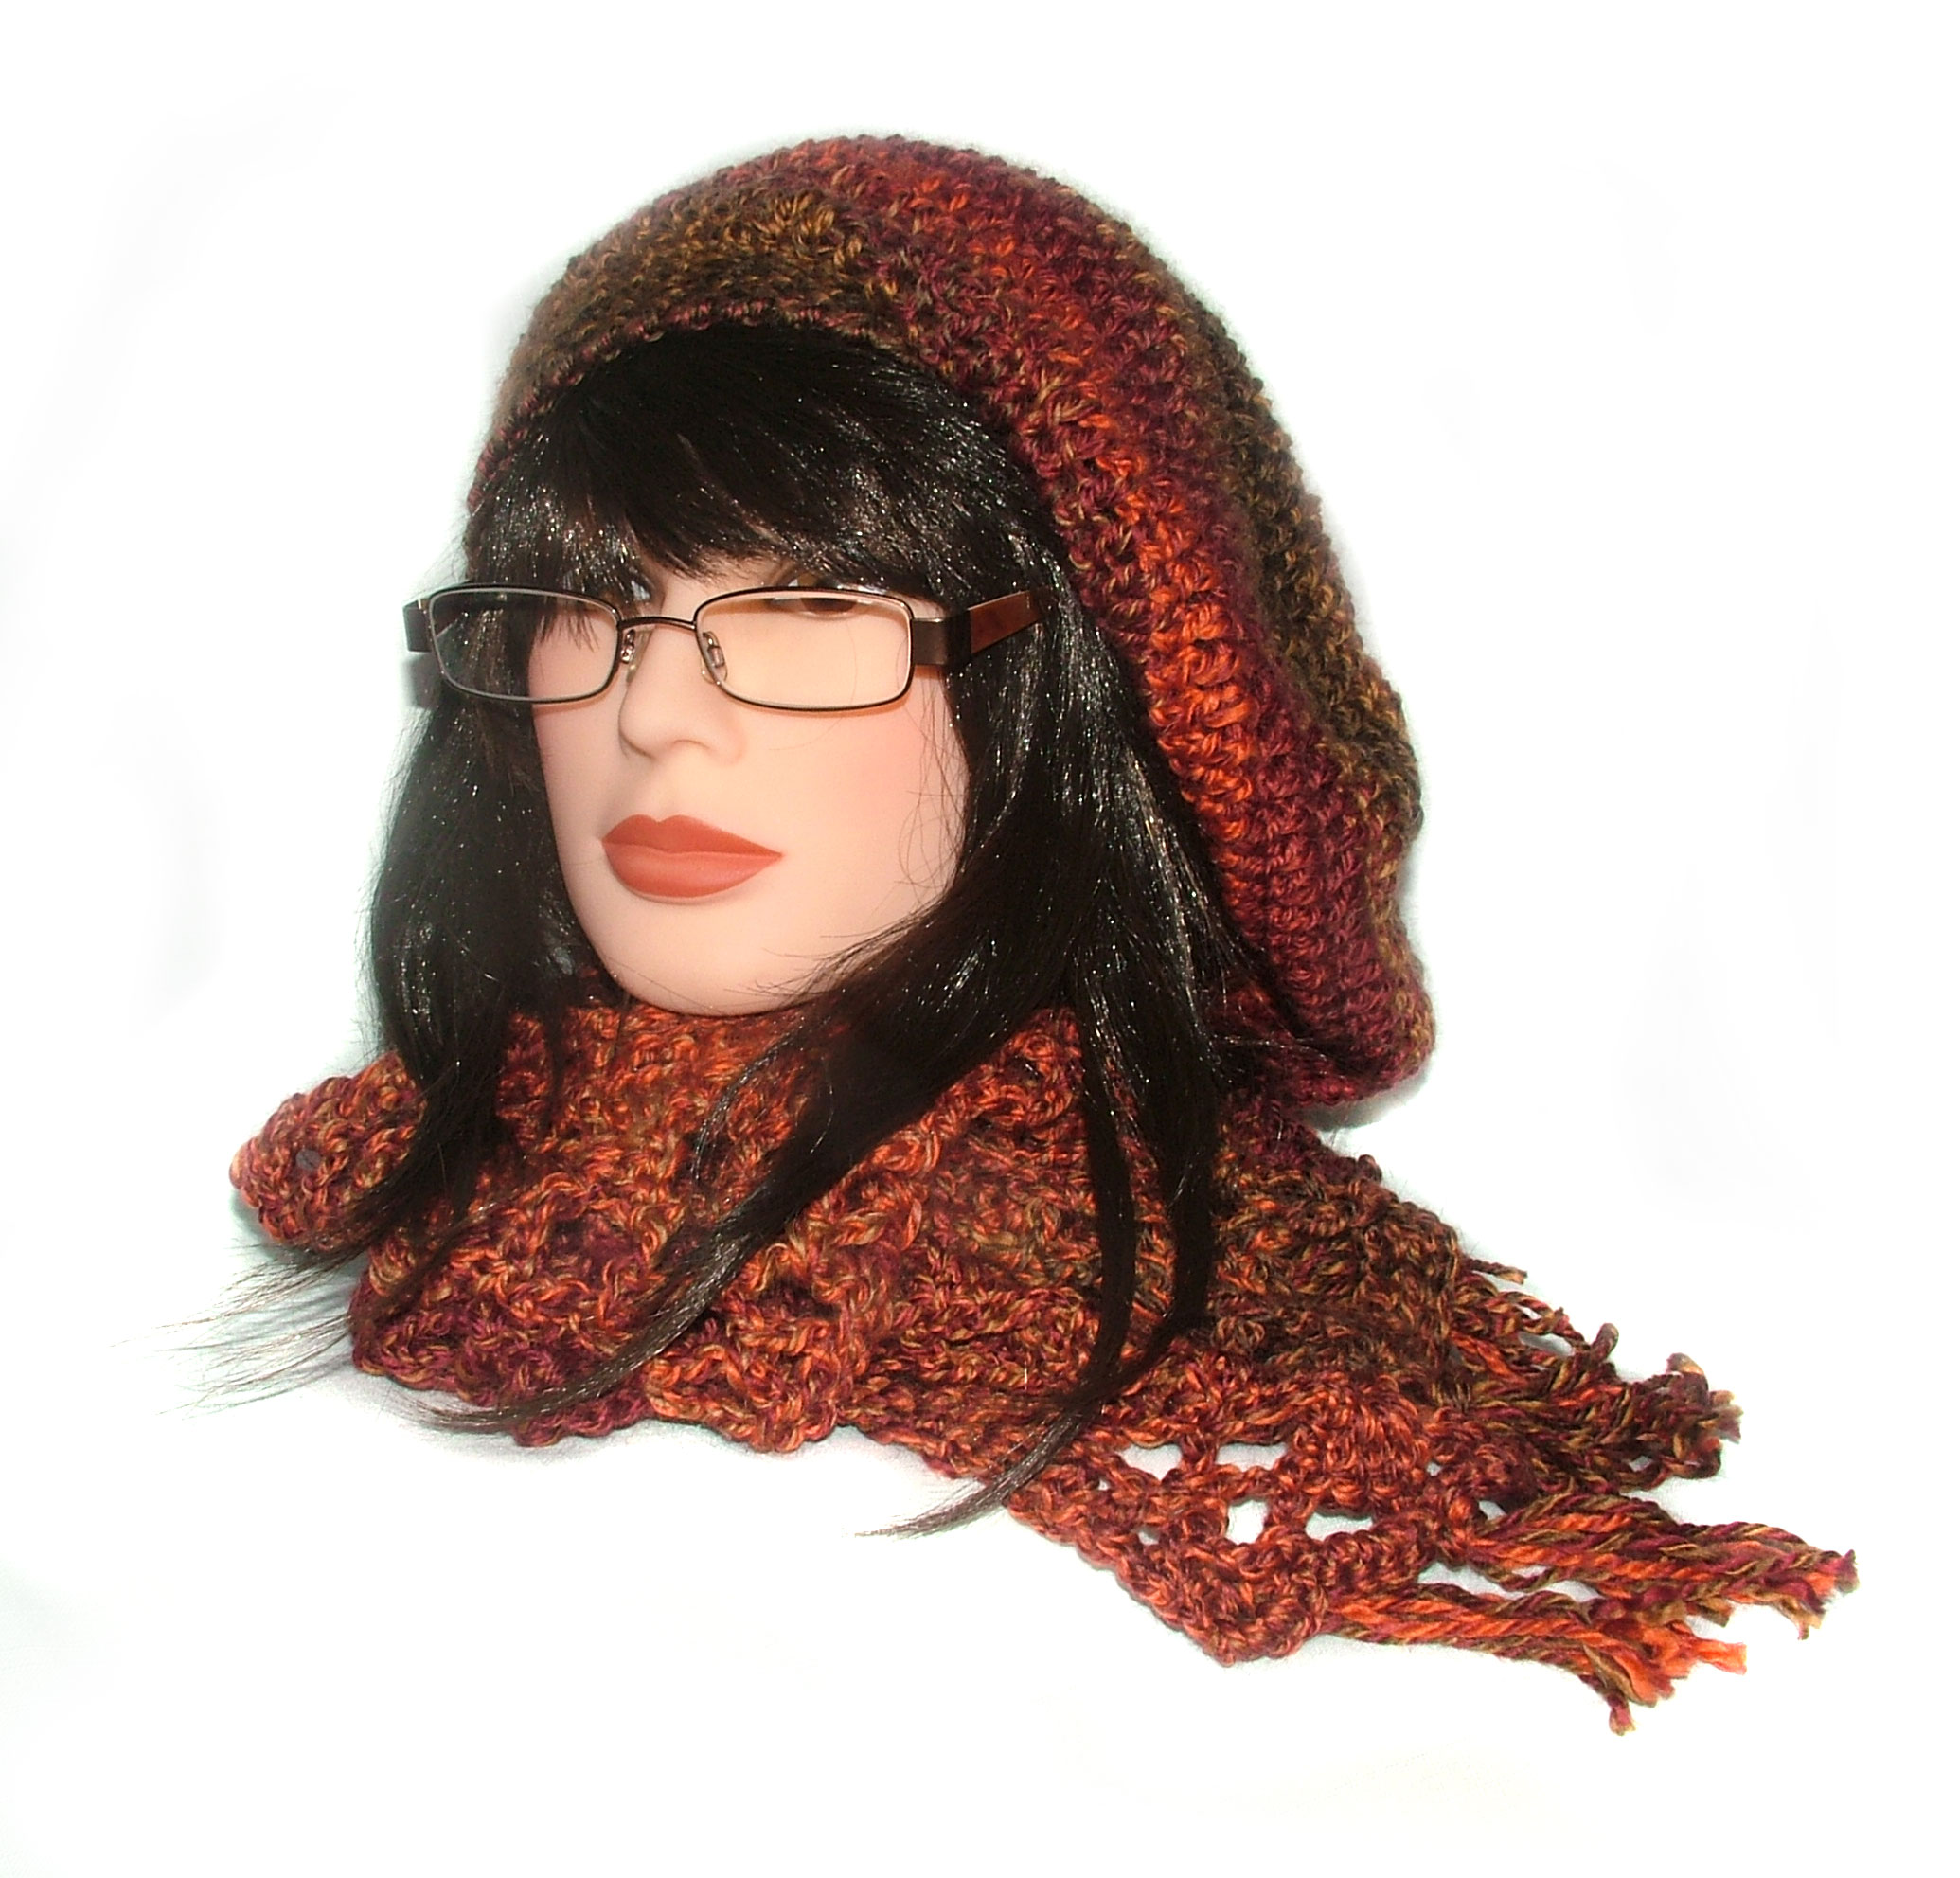 Hat Knit Rasta - Compare Prices, Reviews and Buy at Nextag - Price